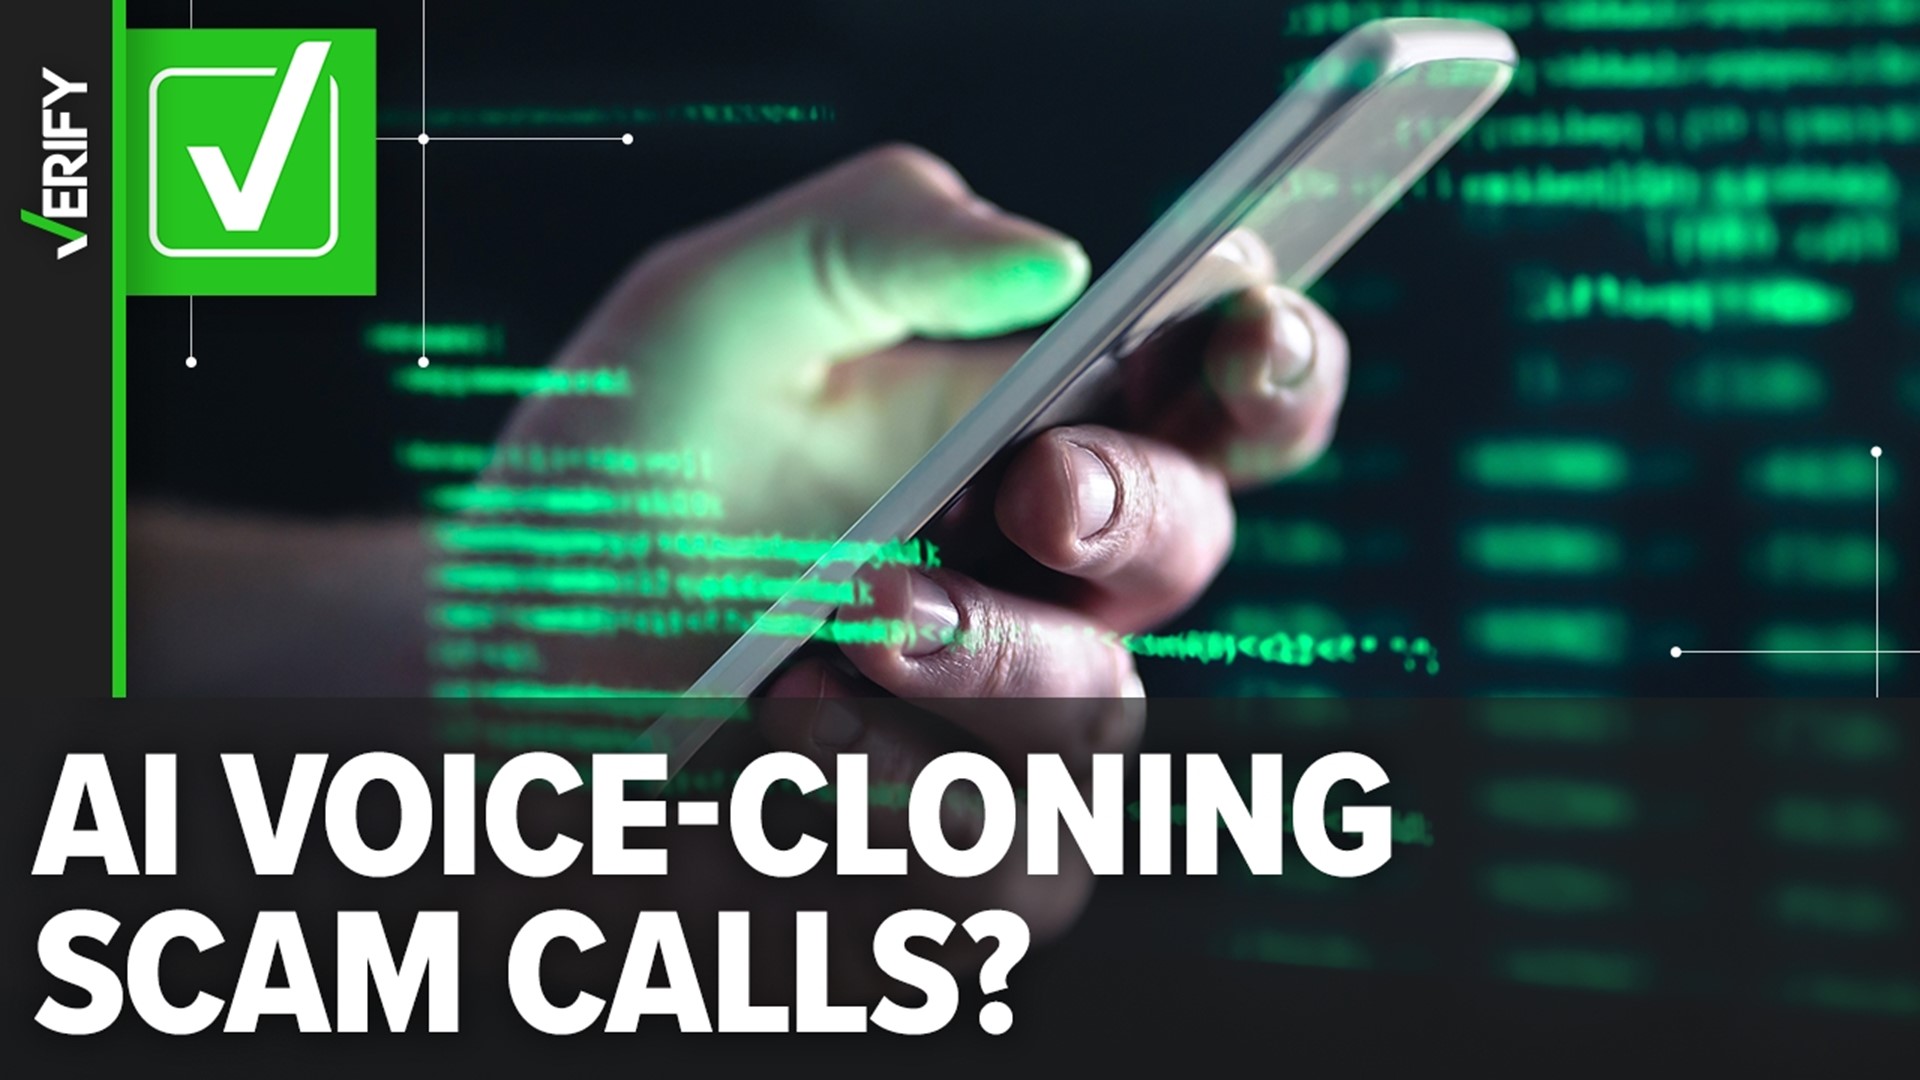 Scammers can impersonate family members or other people you know on the phone by using artificial intelligence (AI) voice cloning technology.